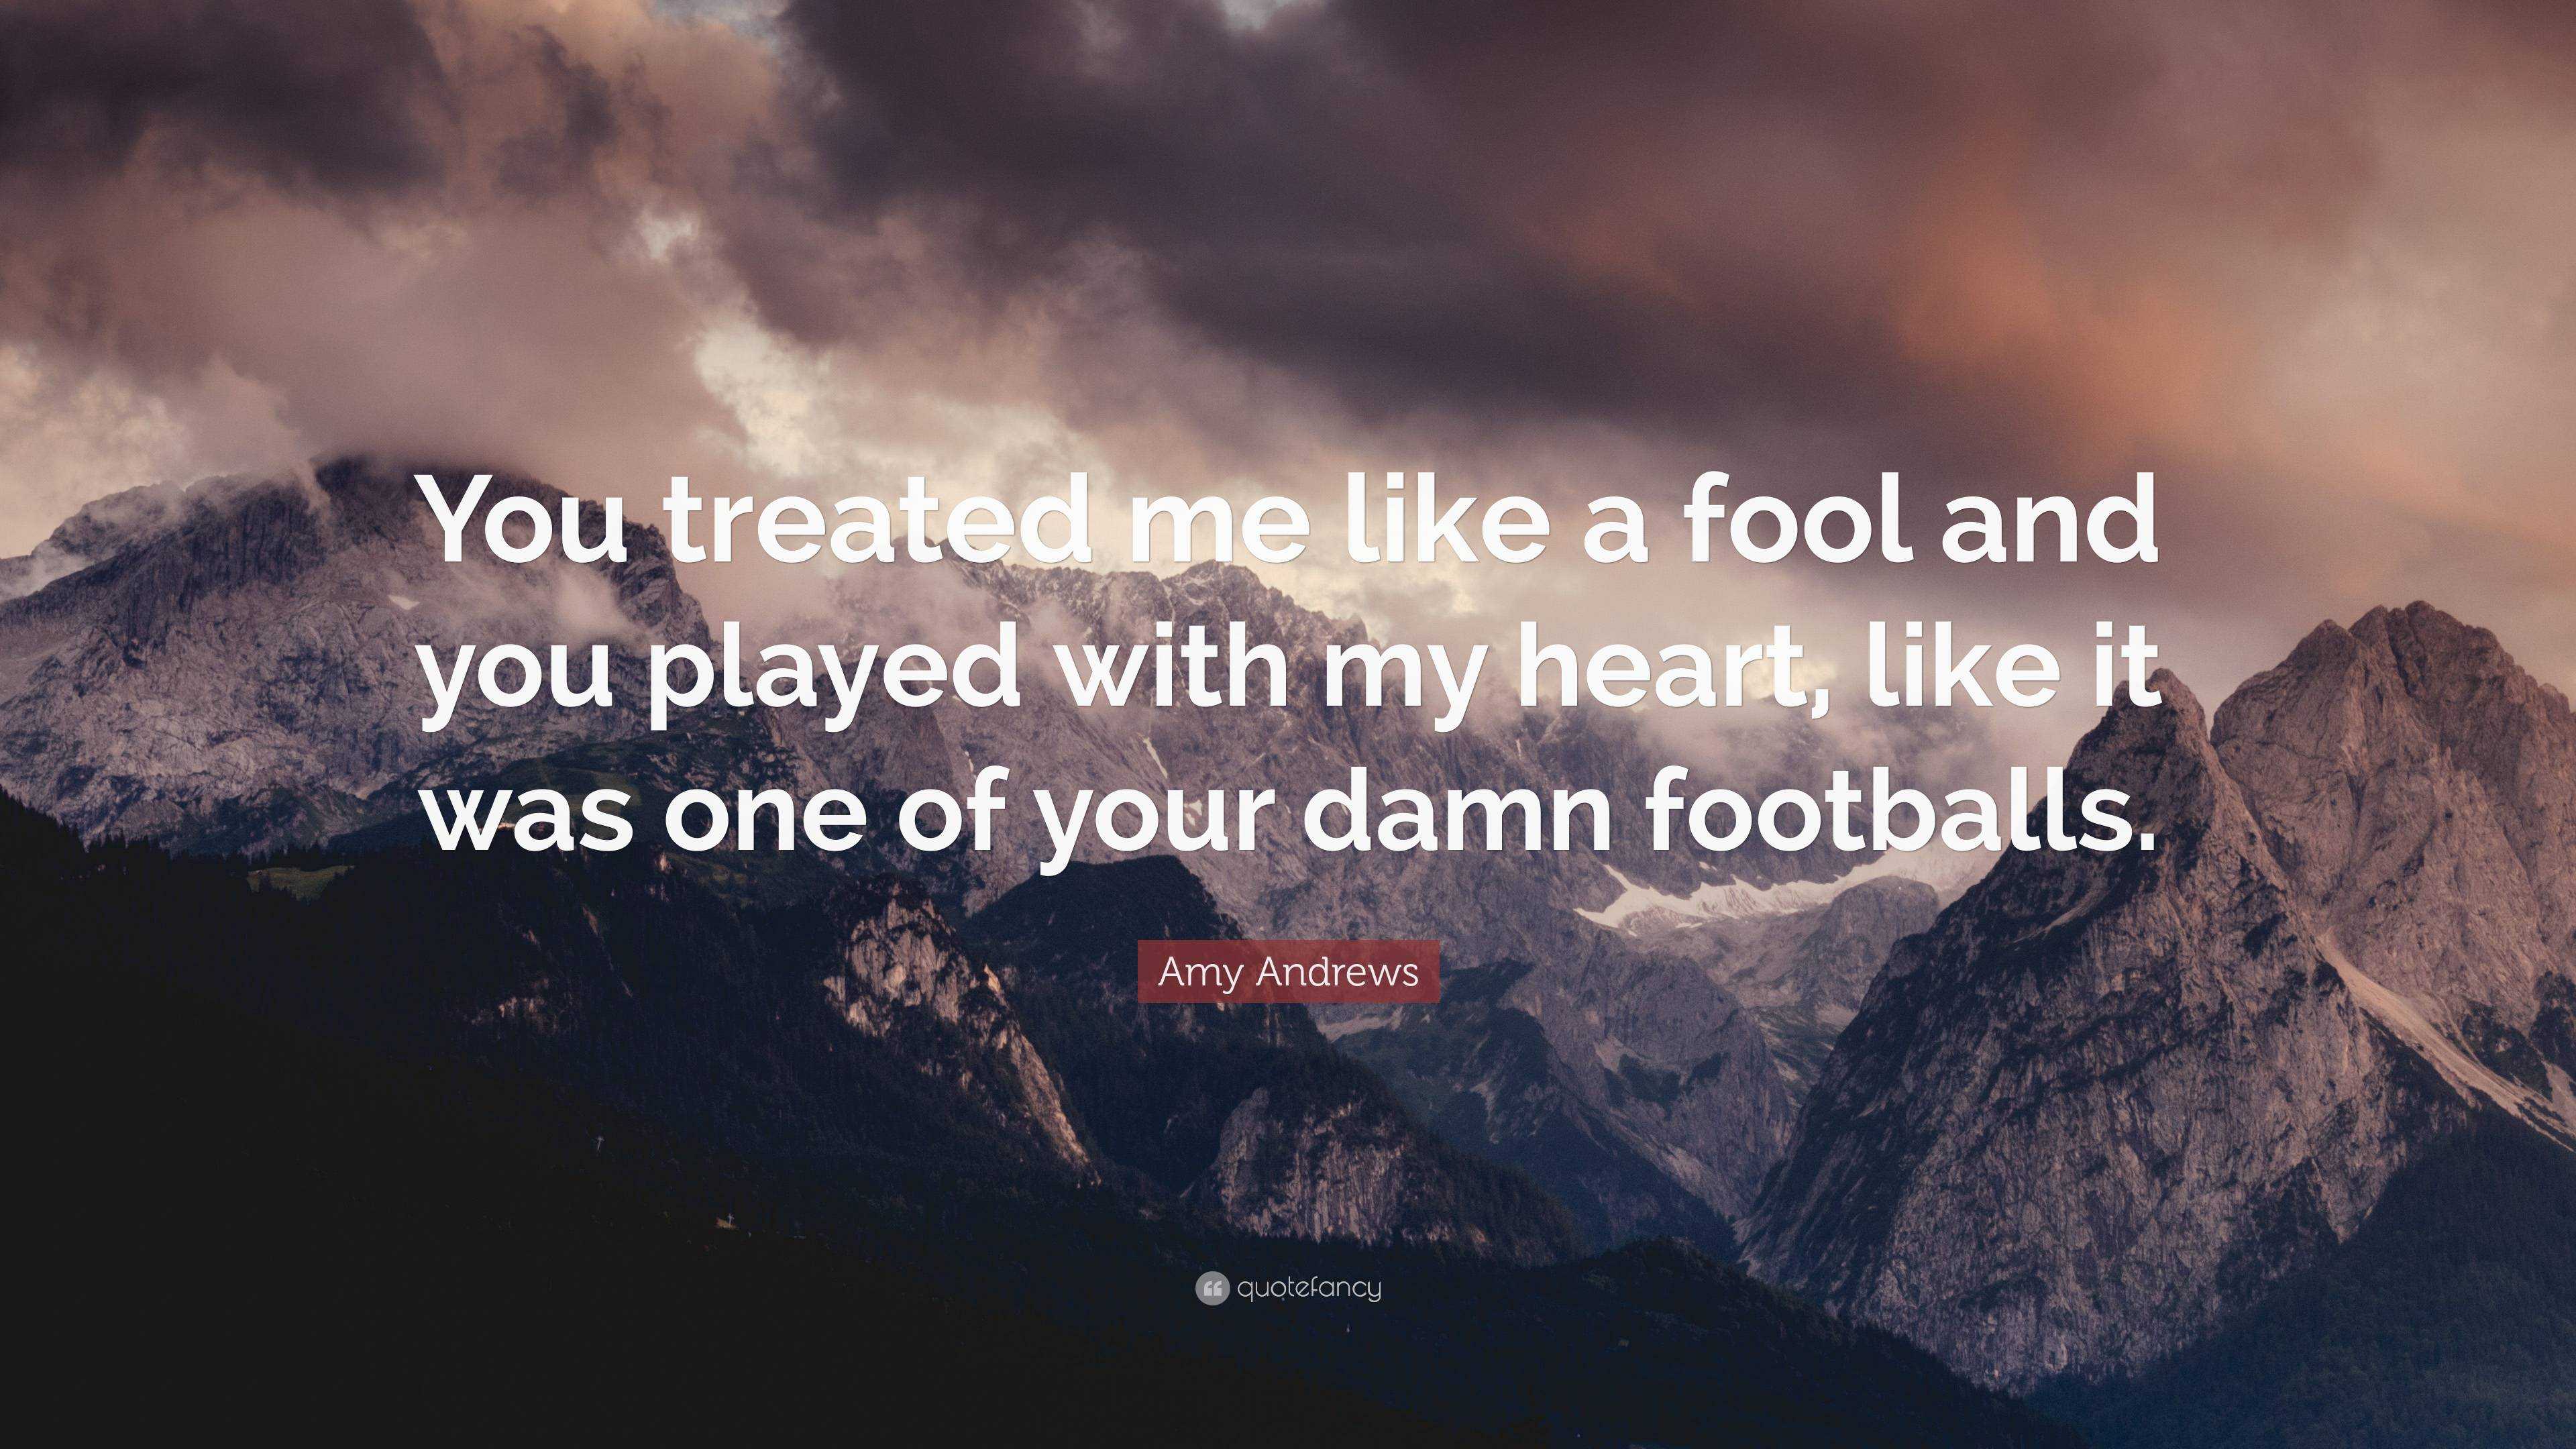 Amy Andrews Quote: “You treated me like a fool and you played with my  heart, like